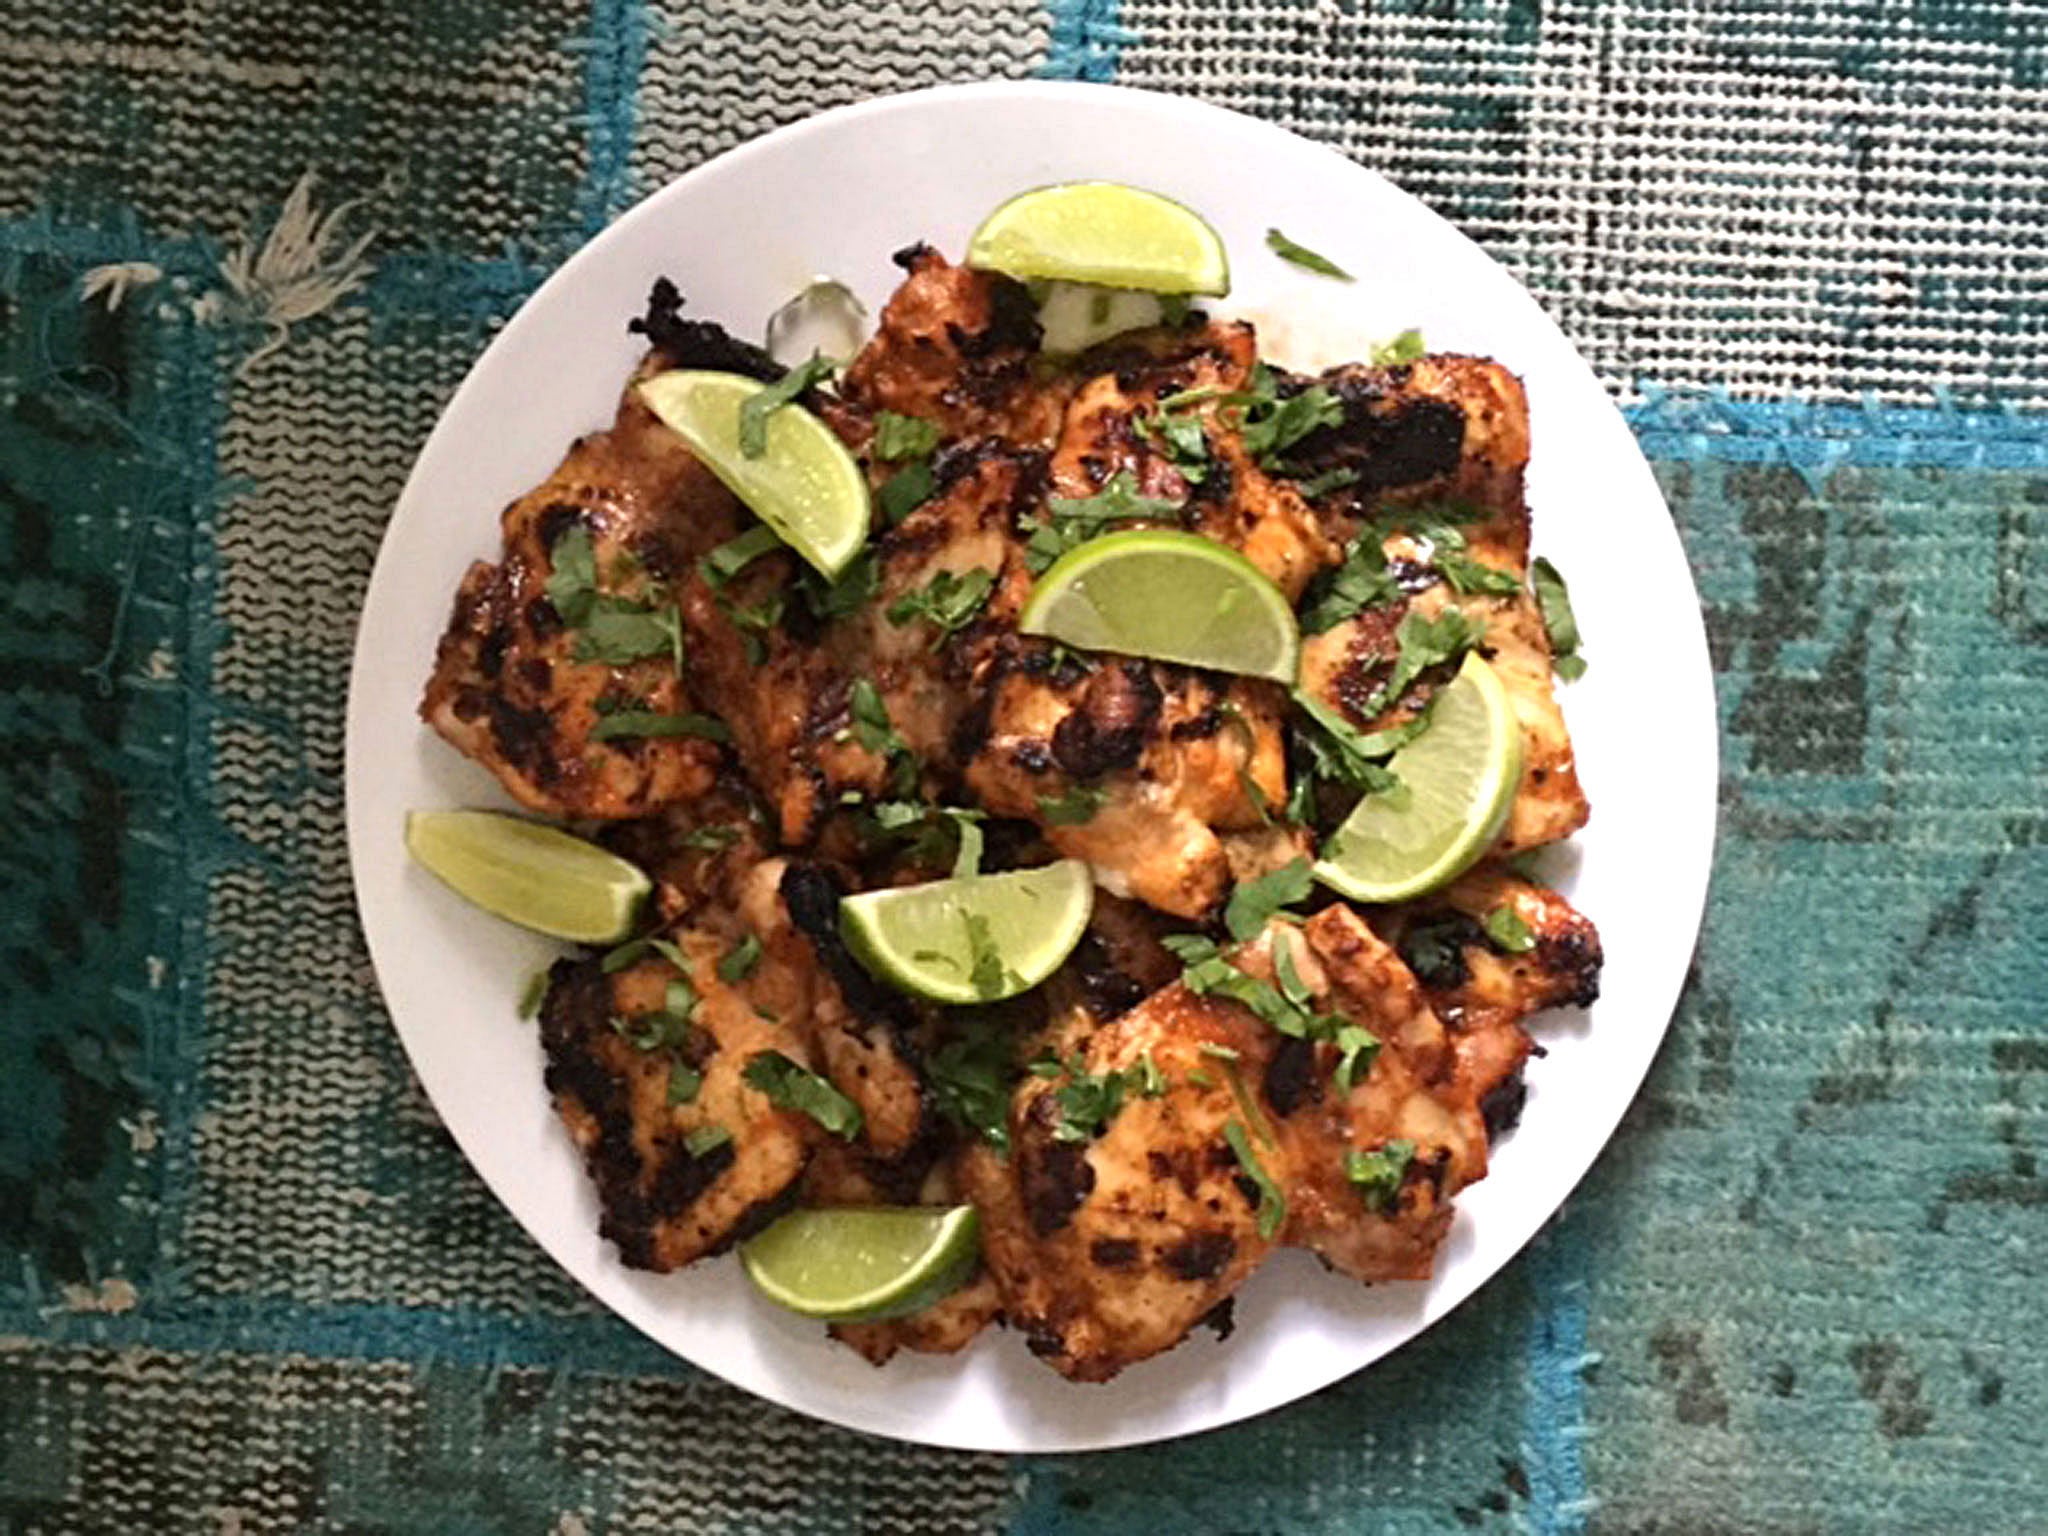 Serve the chicken on a platter with lime wedges and chopped coriander